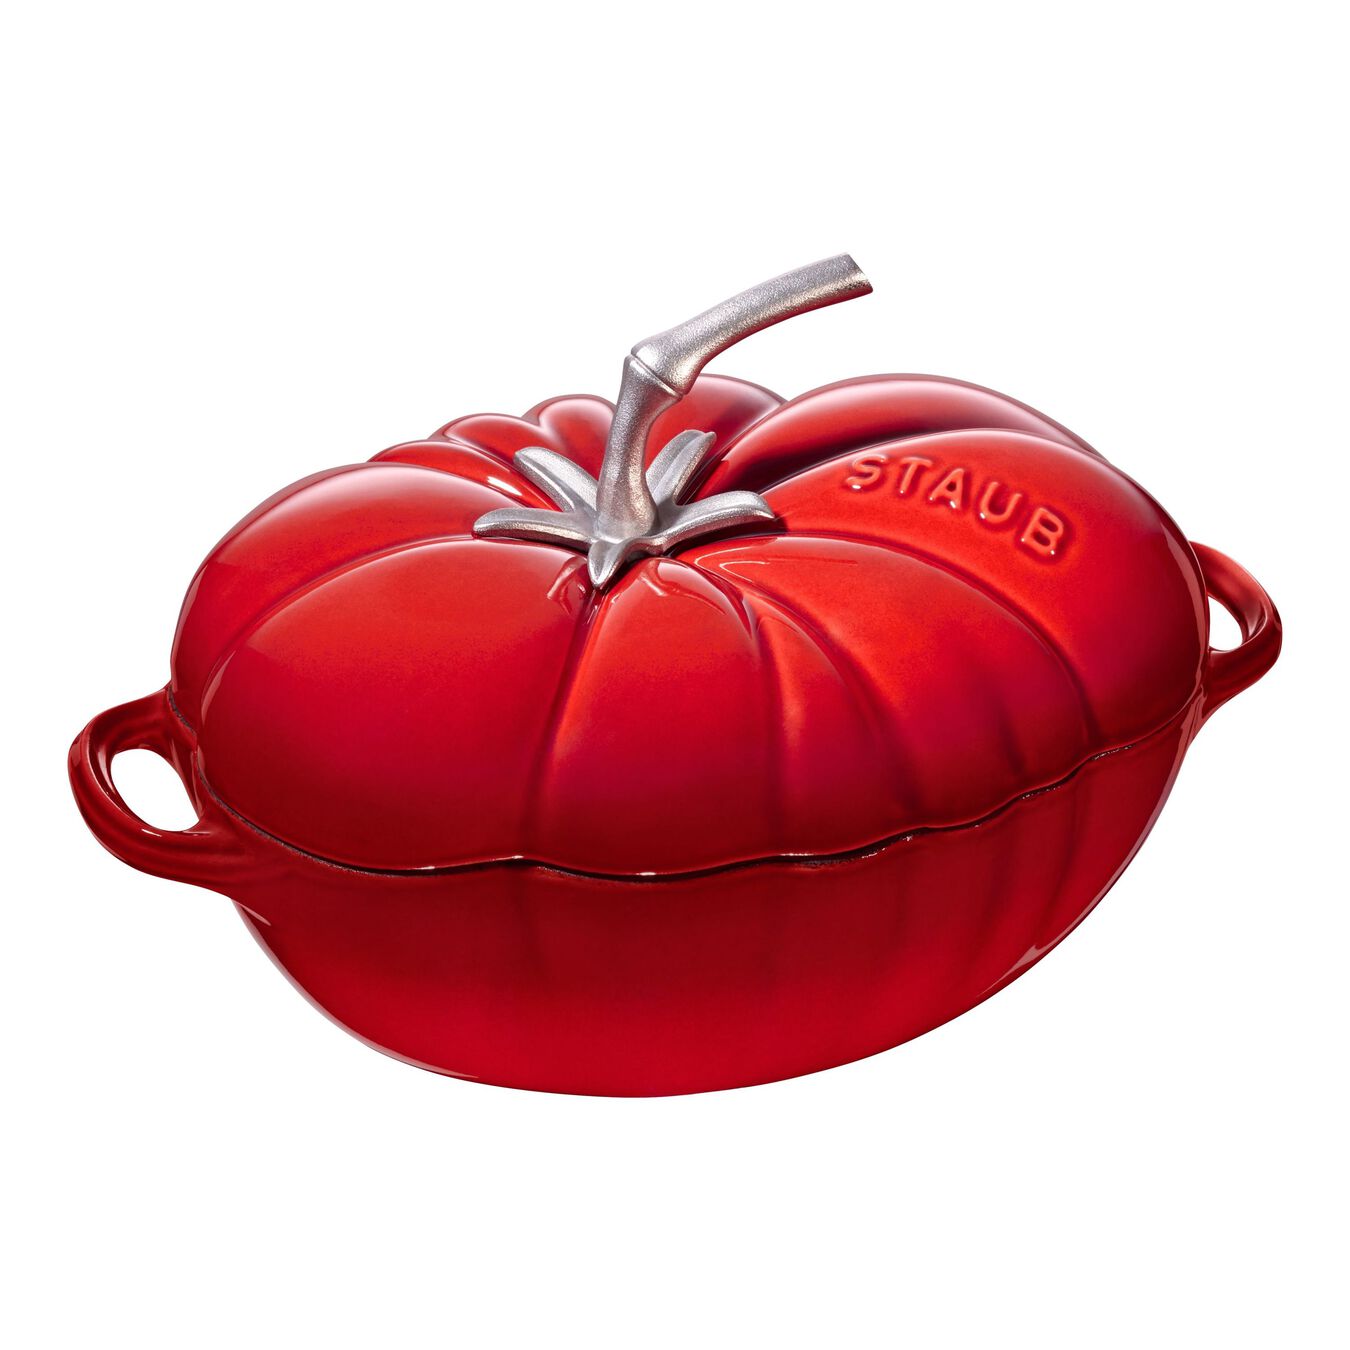 Cocotte 25 cm, Tomate, Kirsch-Rot, Gusseisen,,large 1